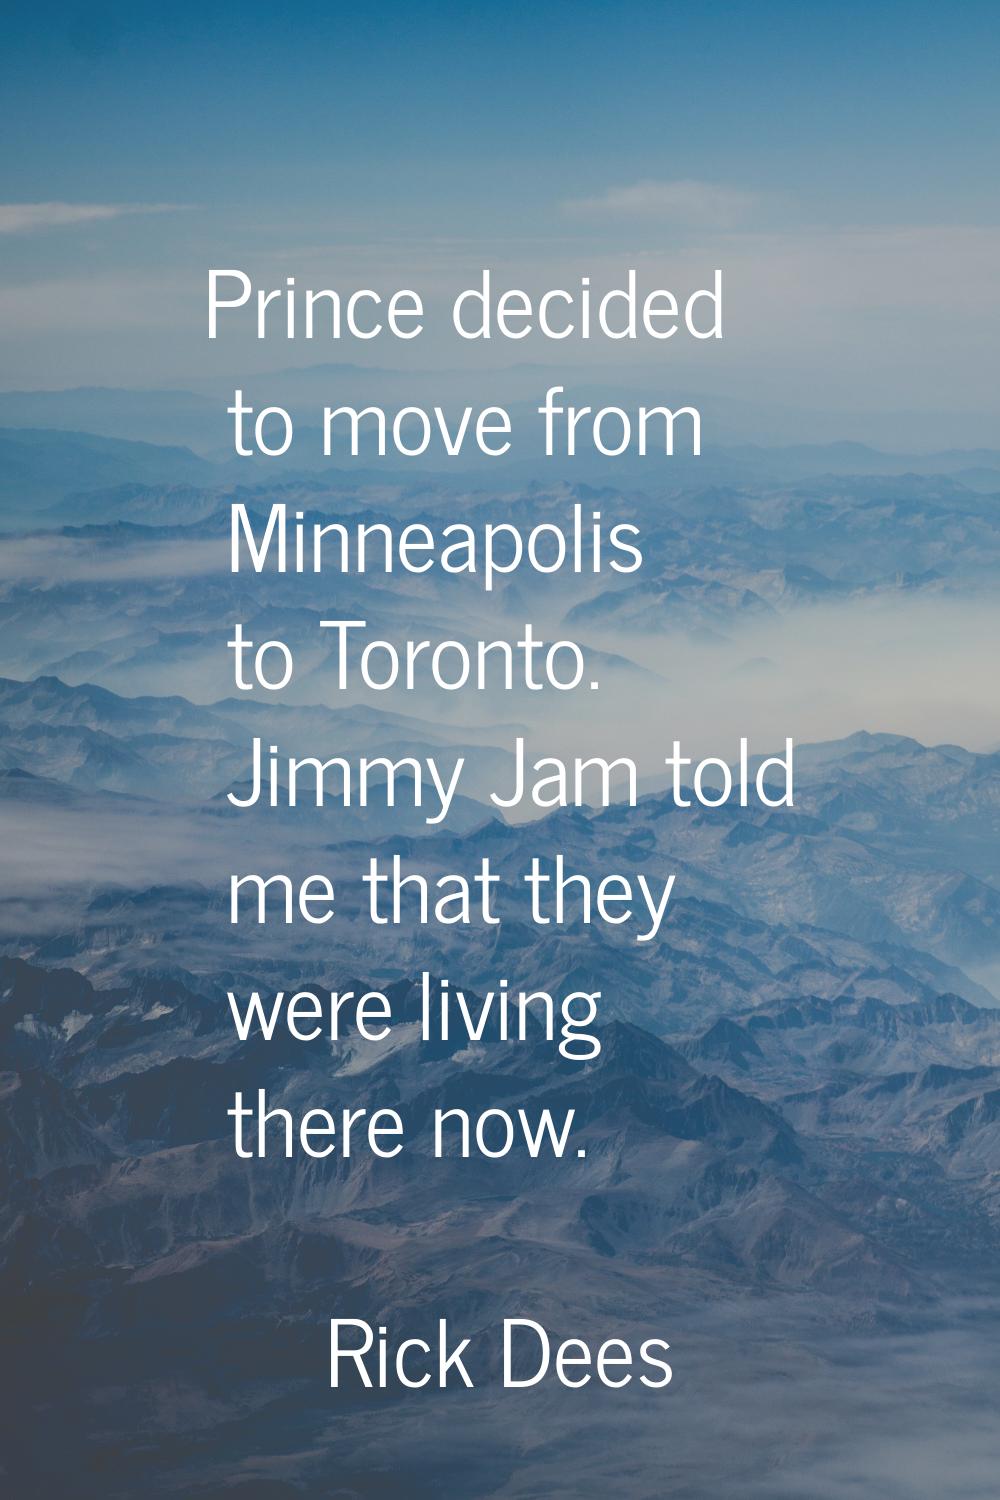 Prince decided to move from Minneapolis to Toronto. Jimmy Jam told me that they were living there n